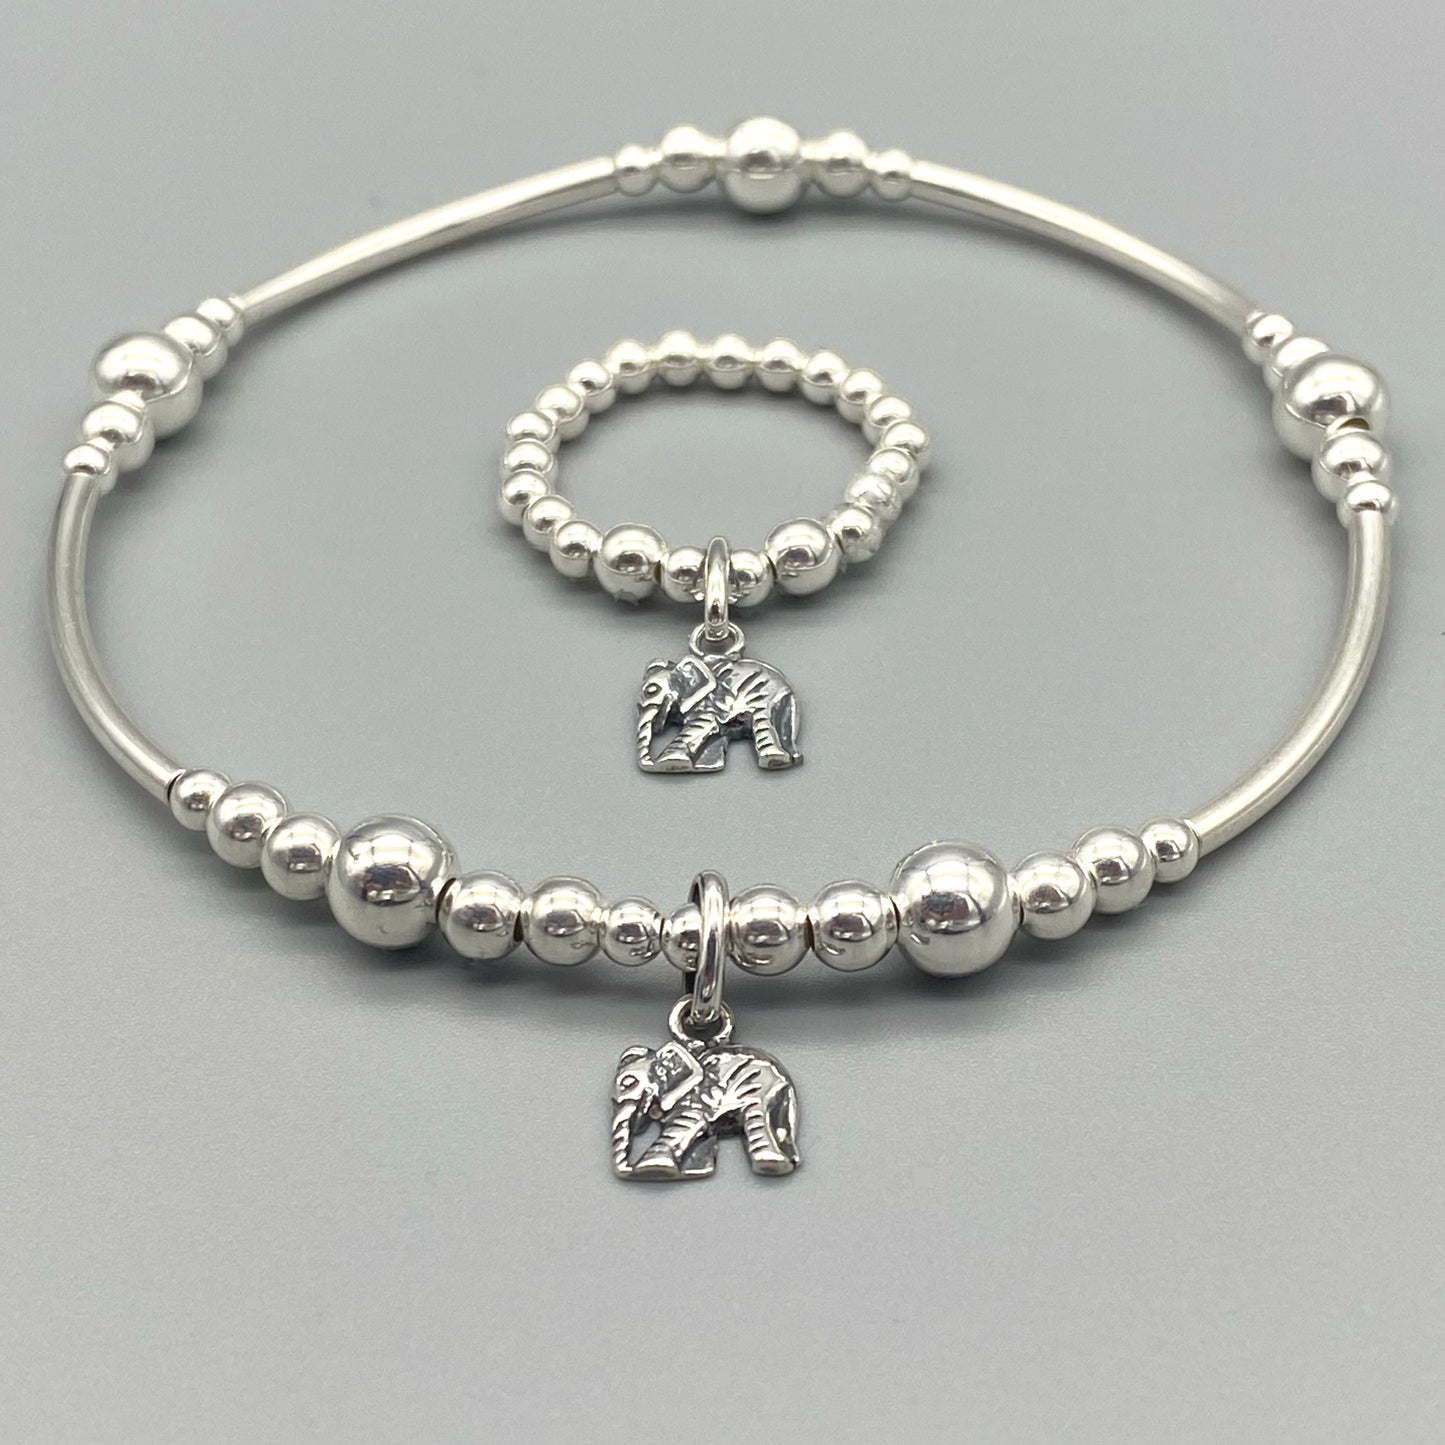 Elephant charm sterling silver women's stacking bracelet & stack ring set by My Silver Wish